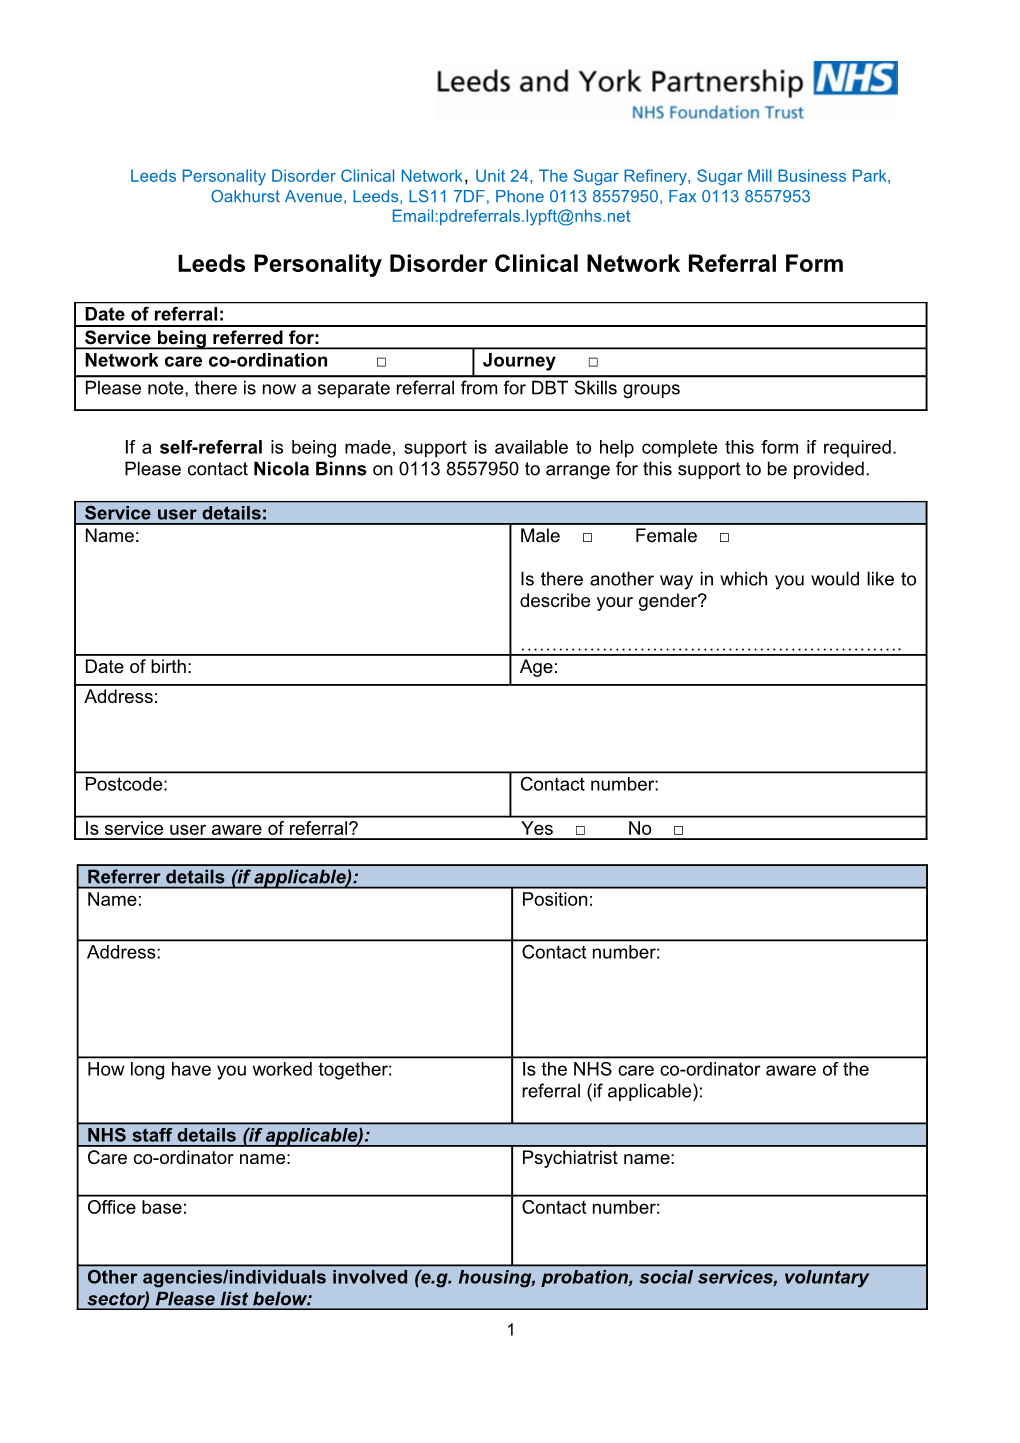 Leeds Personality Disorder Clinical Network